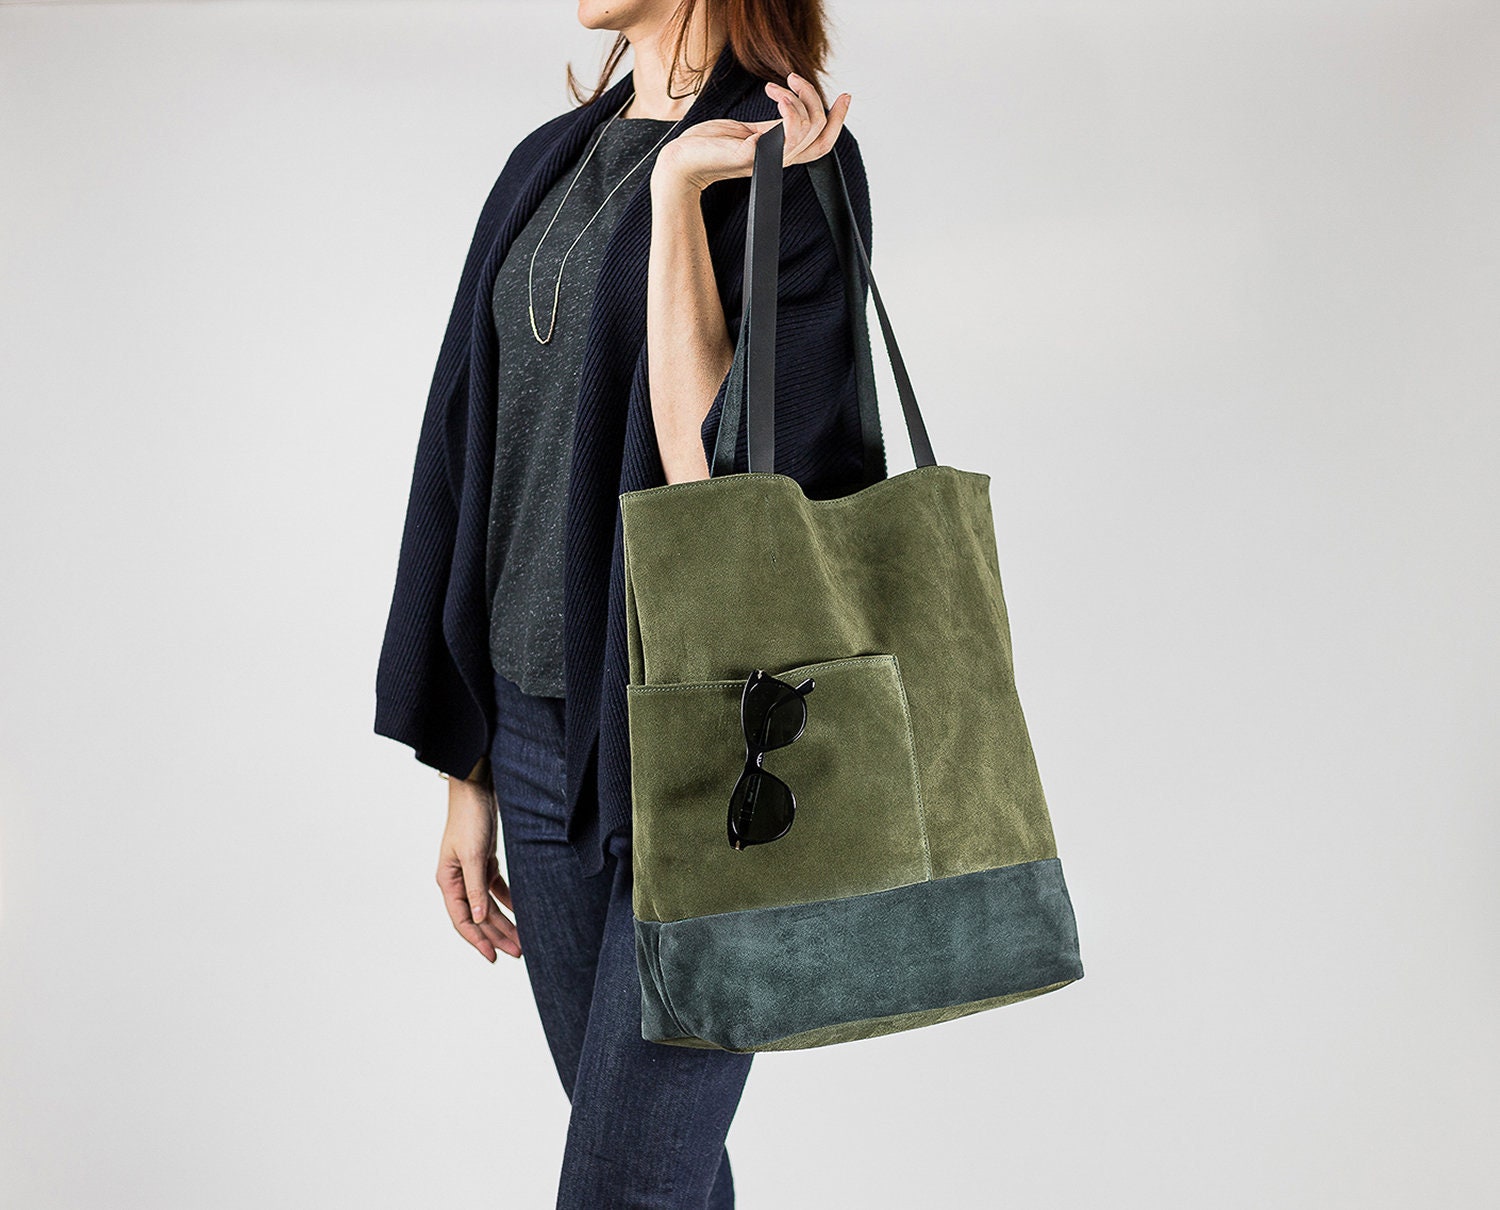 Khaki Suede Leather Tote Bag with Pockets, Minimalist Everyday Shoulder Bag, Soft Leather Tote ...